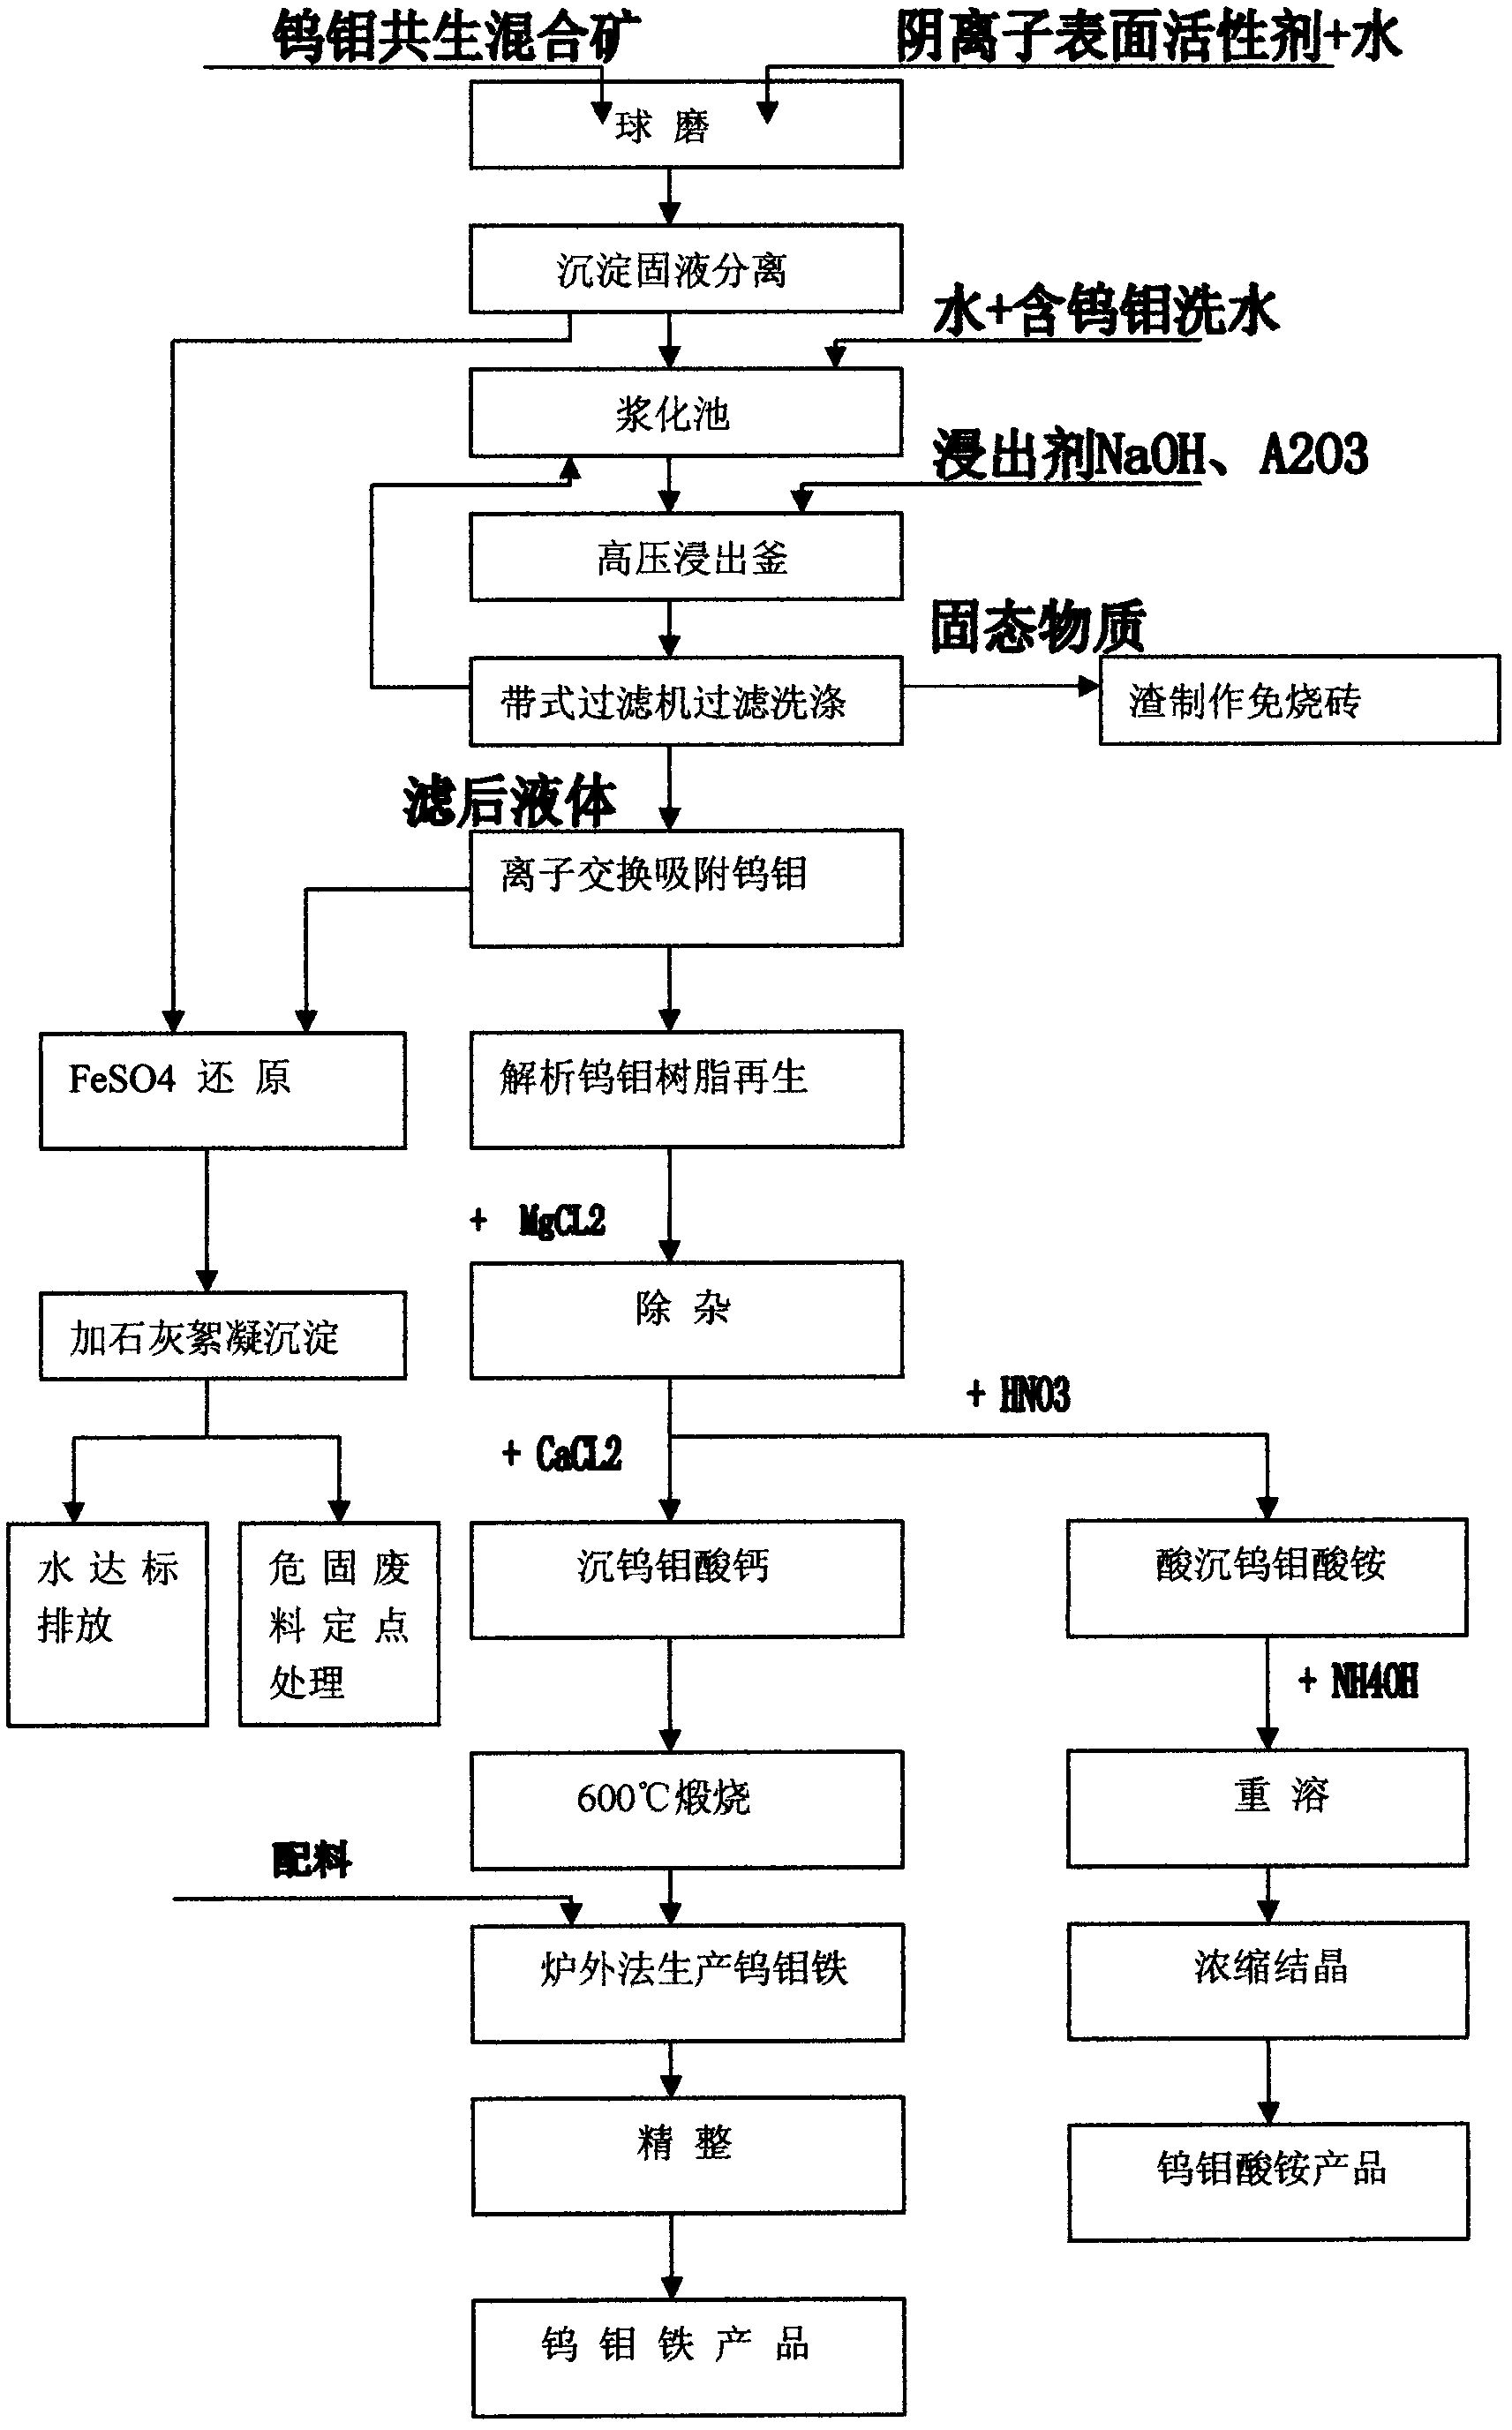 Method for producing tungsten and molybdenum products by processing tungsten and molybdenum symbiotic mixed ore